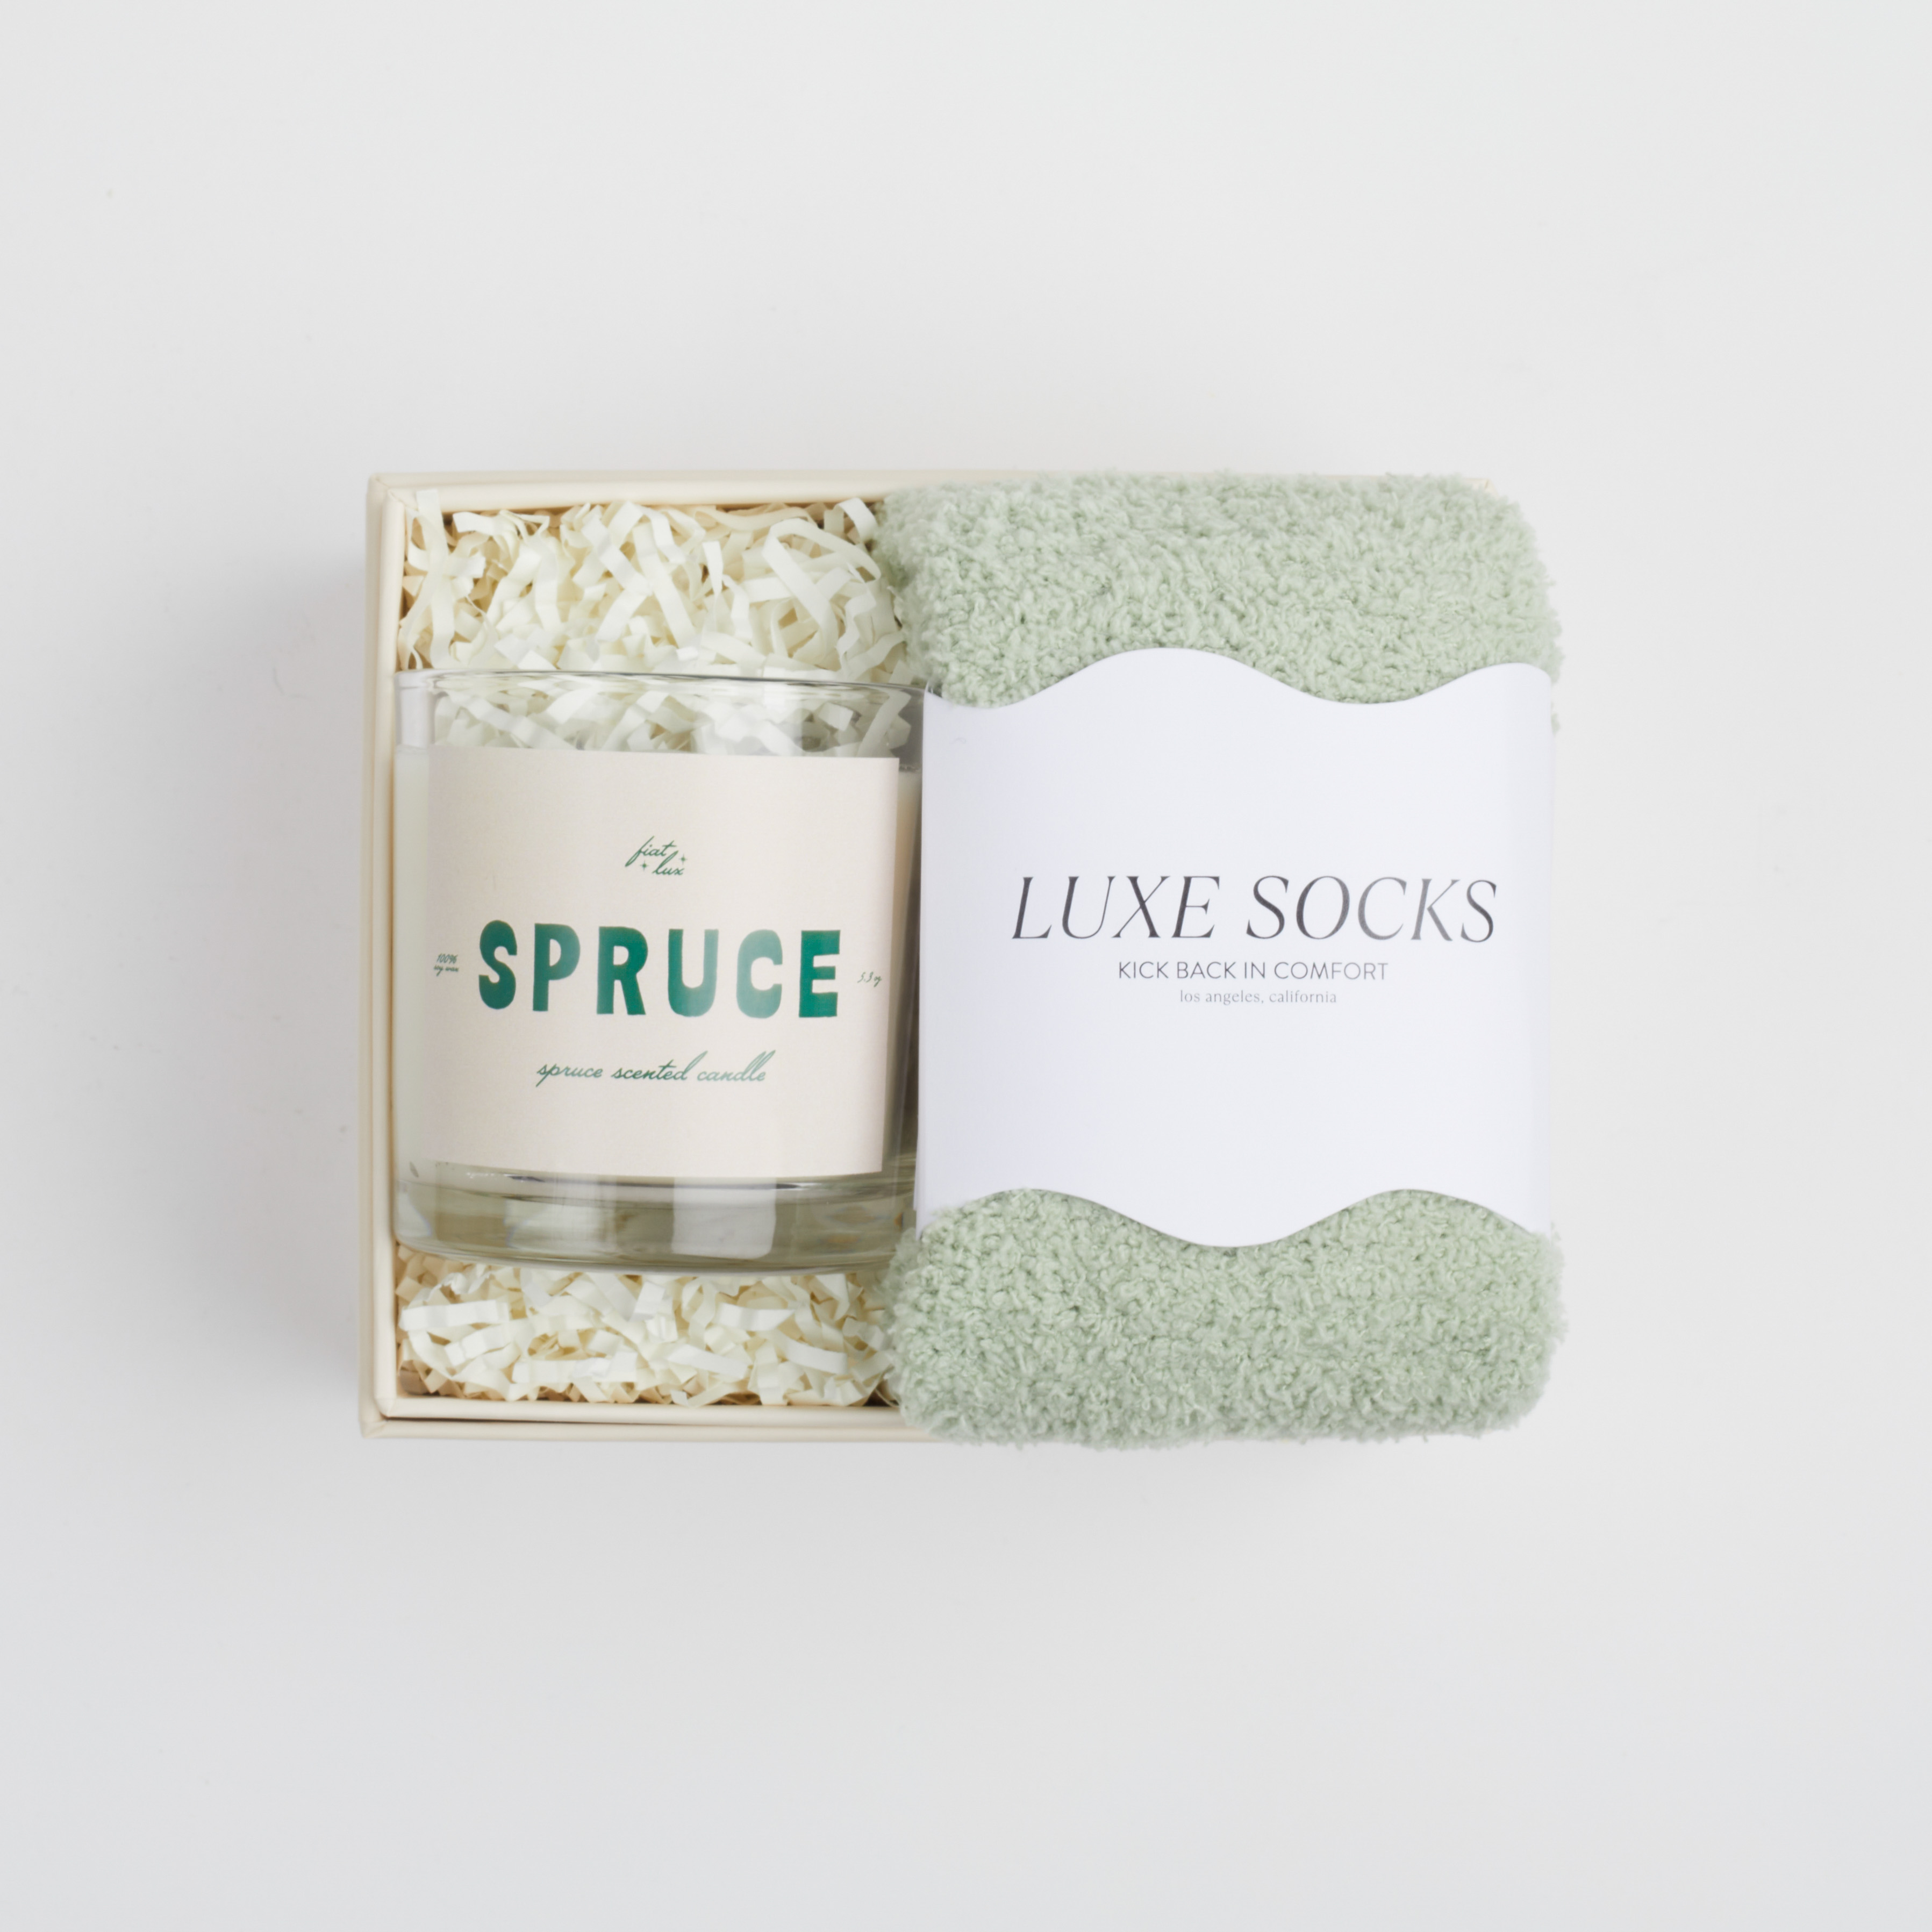 BOXFOX mini cream box packed spruce candle and luxe green cozy socks